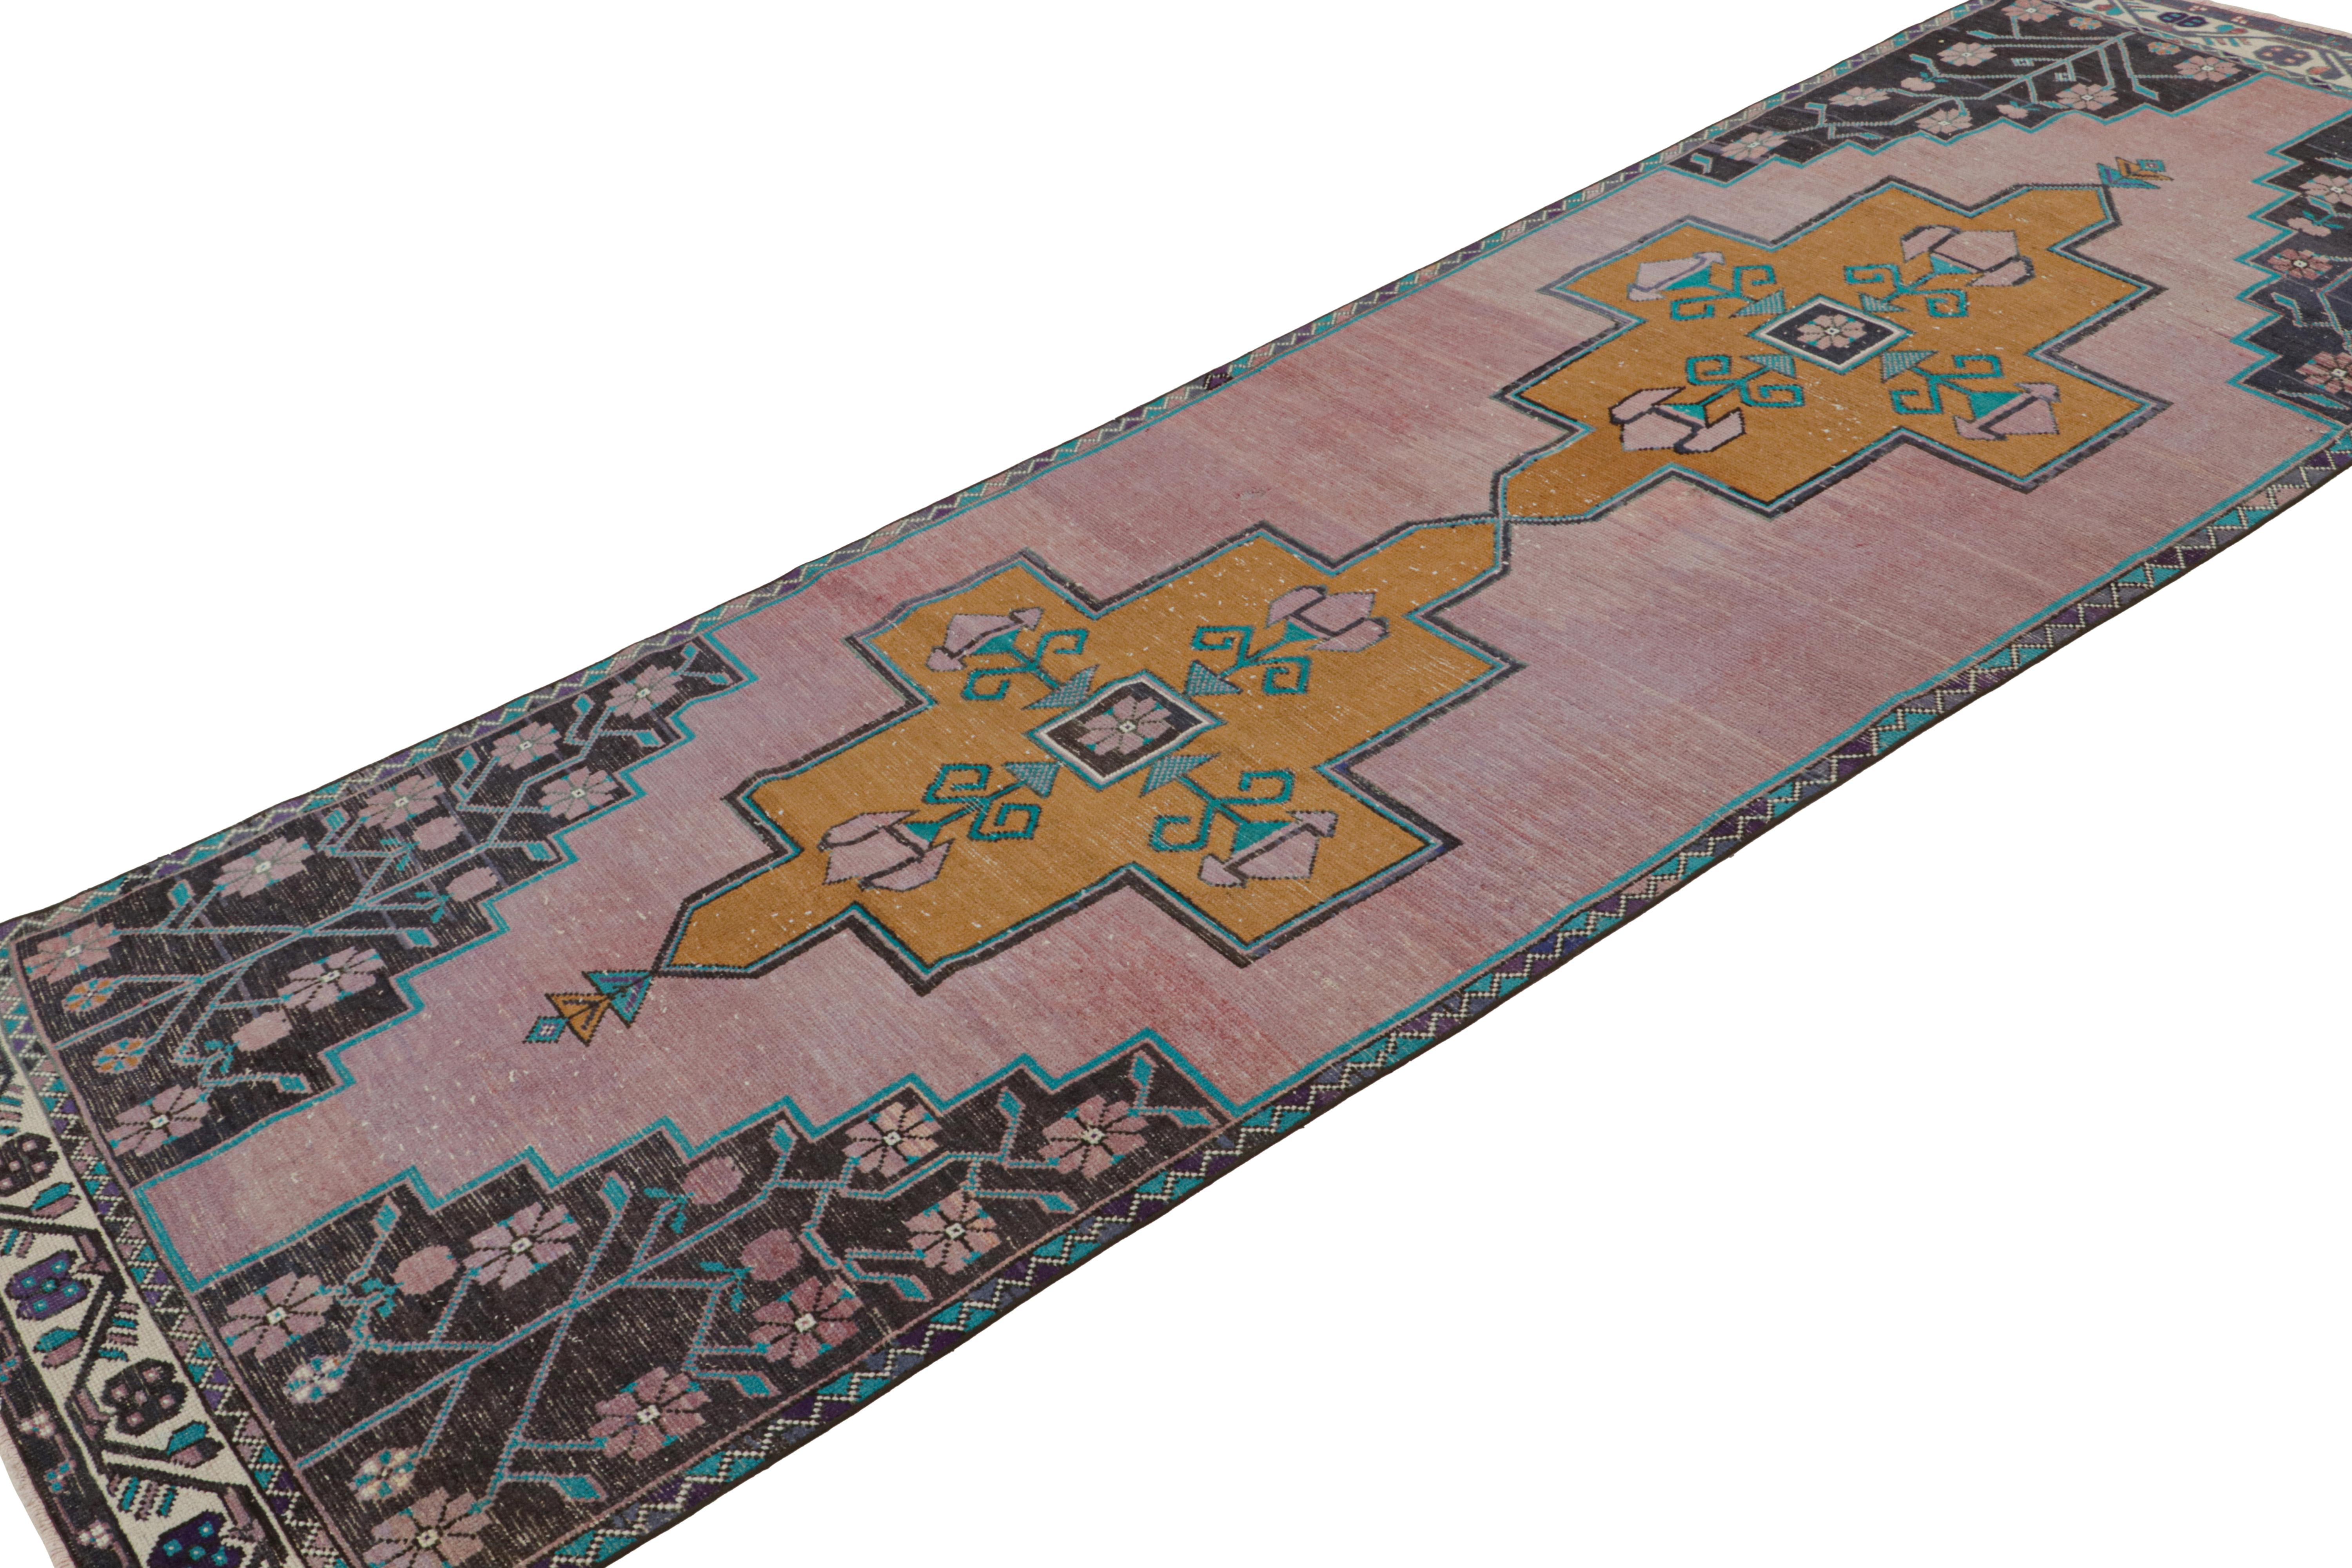 Hand Knotted in wool, this vintage 4x12 Oushak runner rug features an open field style with two medallions and intricate patterns, which isn’t unseen in Oushaks, just a unique choice which is definitely indicating a vintage piece. 

On the Design: